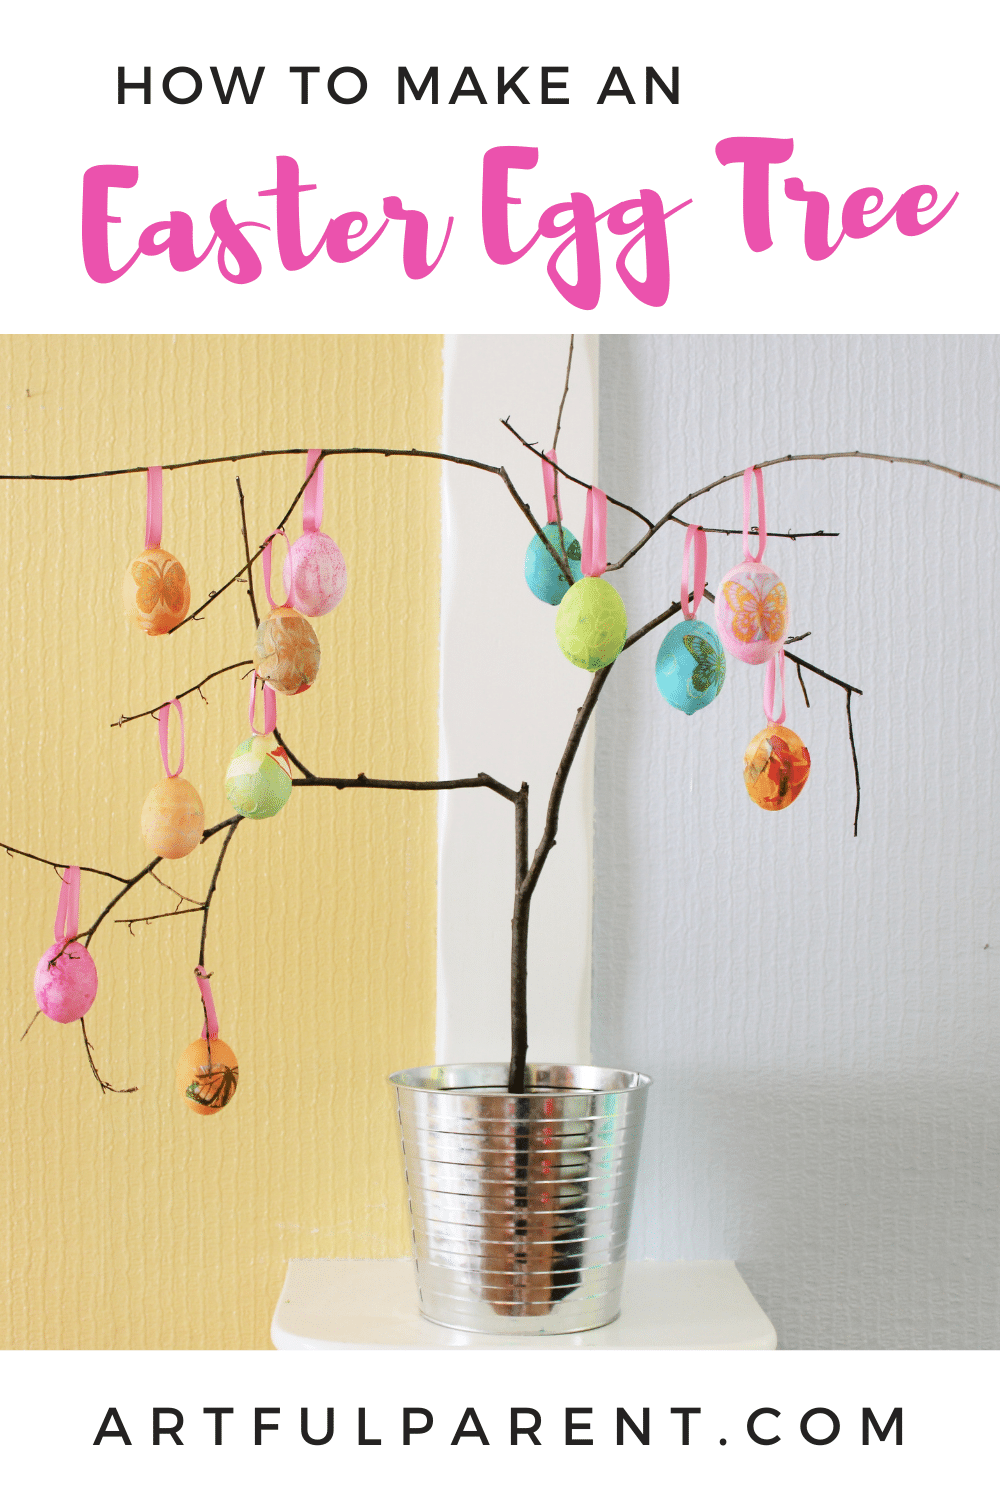 How to Make an Easter Egg Tree